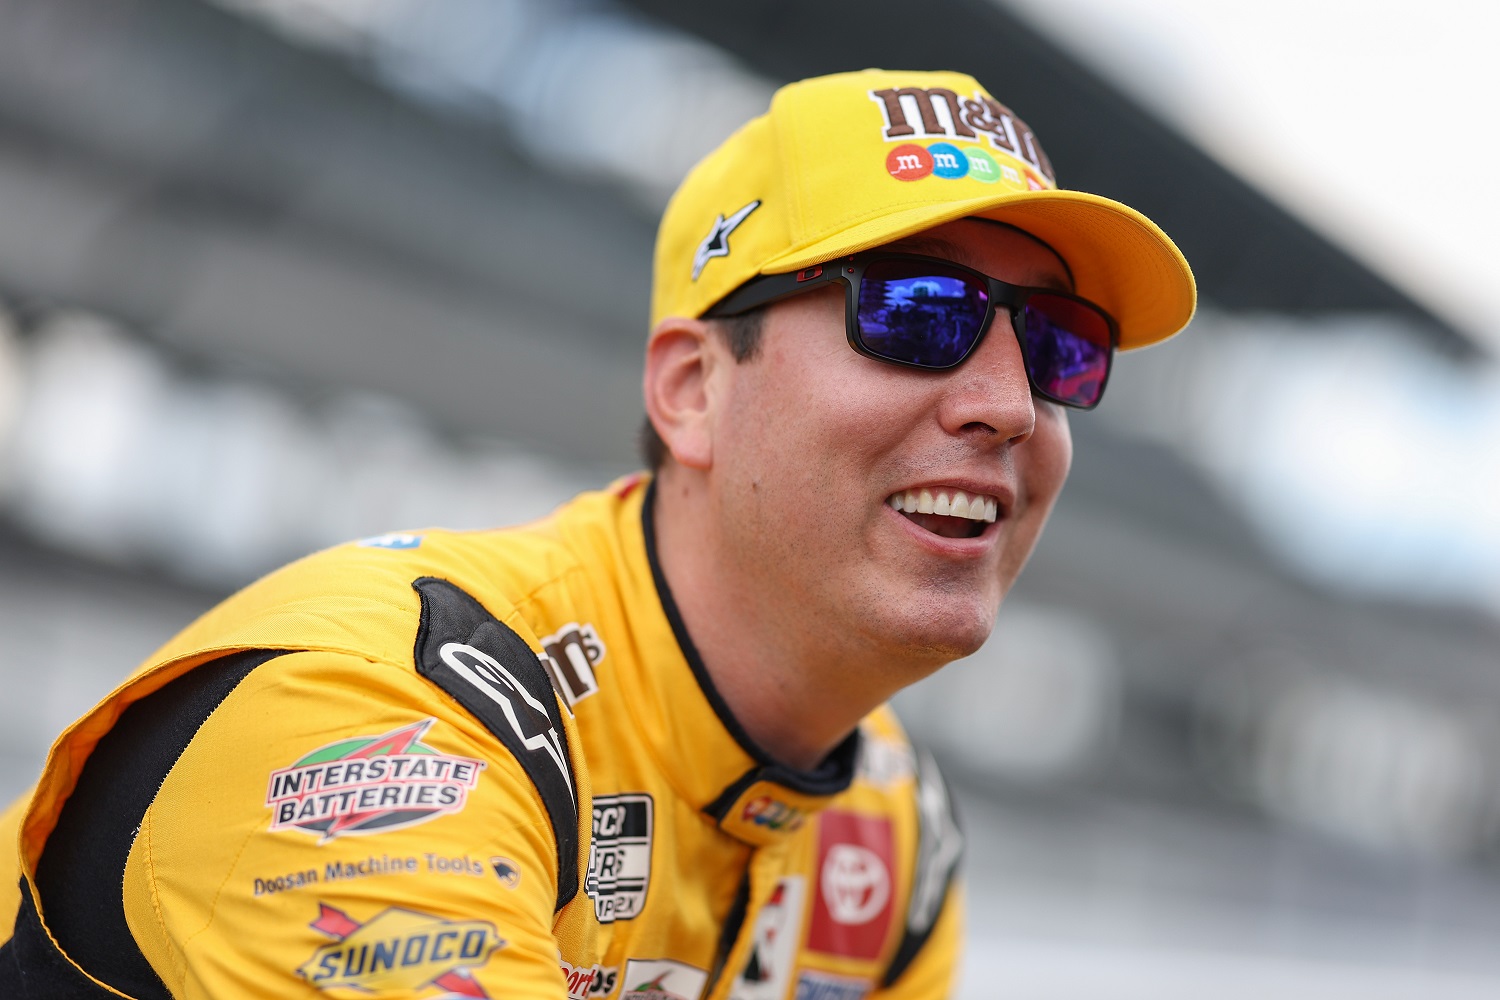 Kyle Busch waits on the grid prior to the NASCAR Cup Series Verizon 200 at the Brickyard at Indianapolis Motor Speedway on July 31, 2022. | James Gilbert/Getty Images